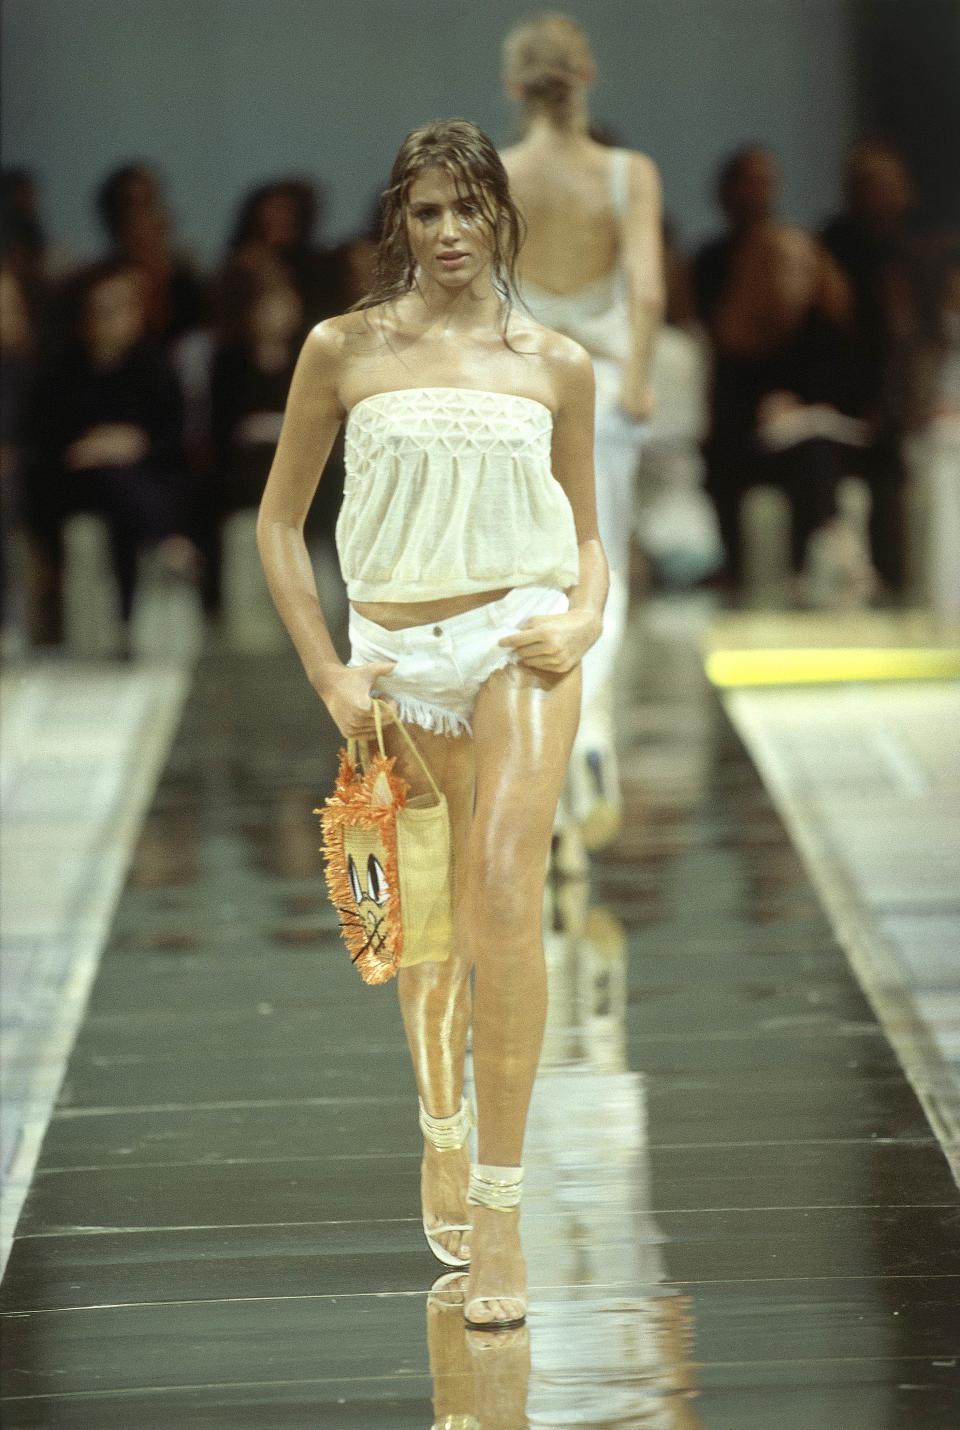 A model on the runway at the Spring/Summer 2000 Chloé ready-to-wear collection designed by Stella McCartney, wearing white tube top with smocking at top edge, fringed hot pants, high-heel sandals with white and gold ankle bands, and carrying a straw bag with cat-face design. (Photo: Getty Images)